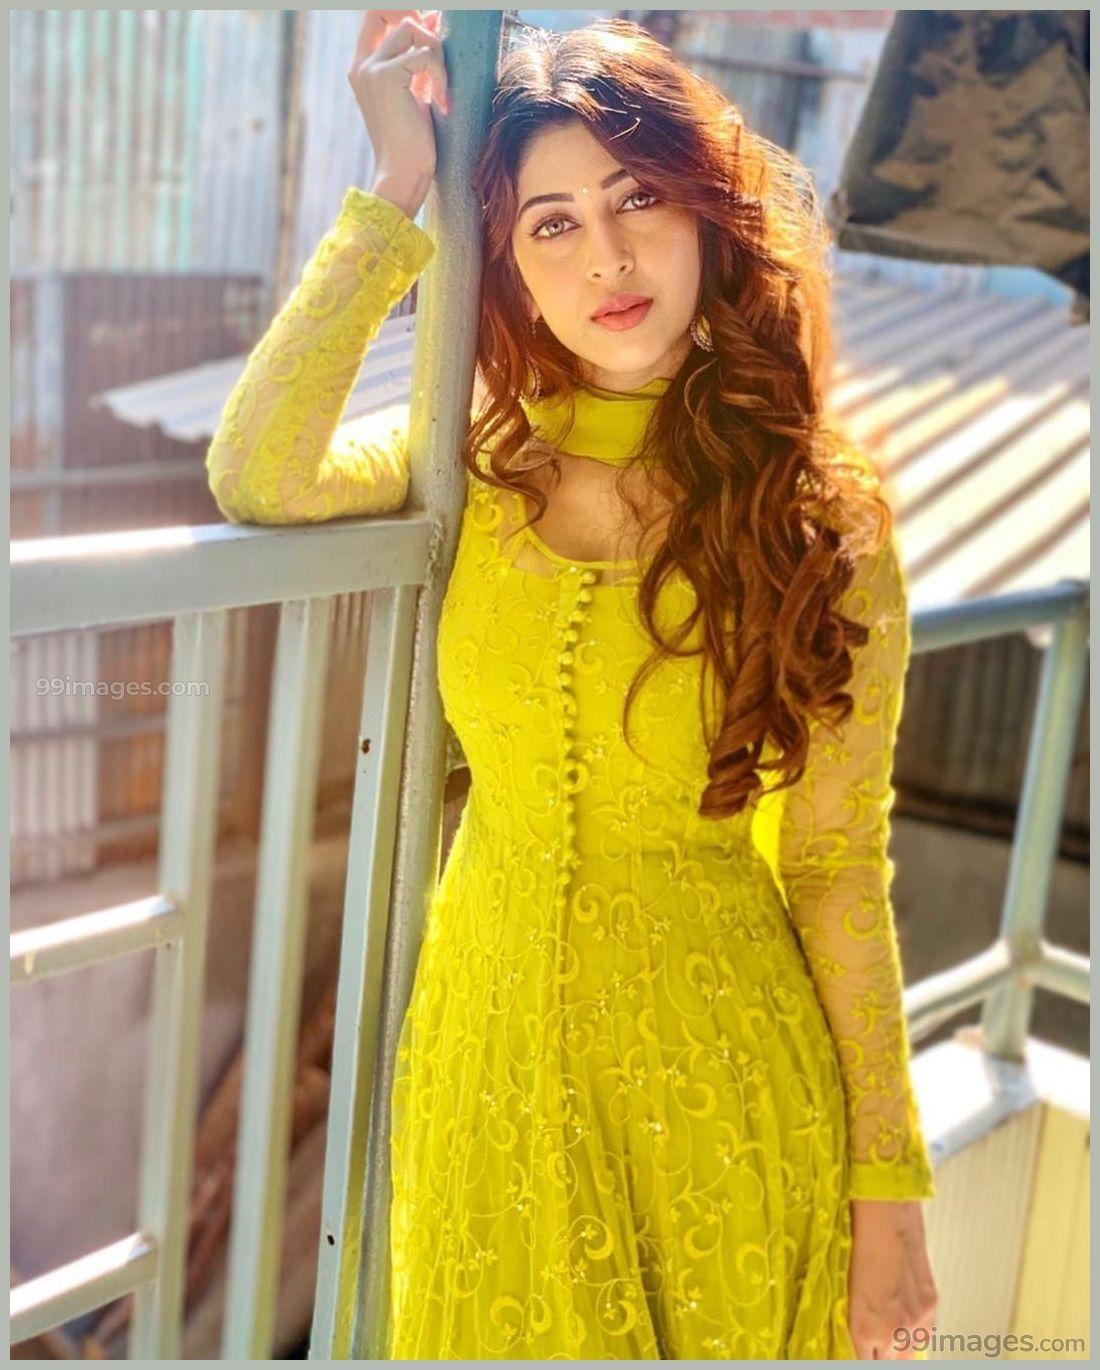 Sonarika Bhadoria Beautiful HD Photo & Mobile Wallpaper HD (Android IPhone) (1080p) - #sona. Indian Designer Outfits, Dress Indian Style, Stylish Dresses